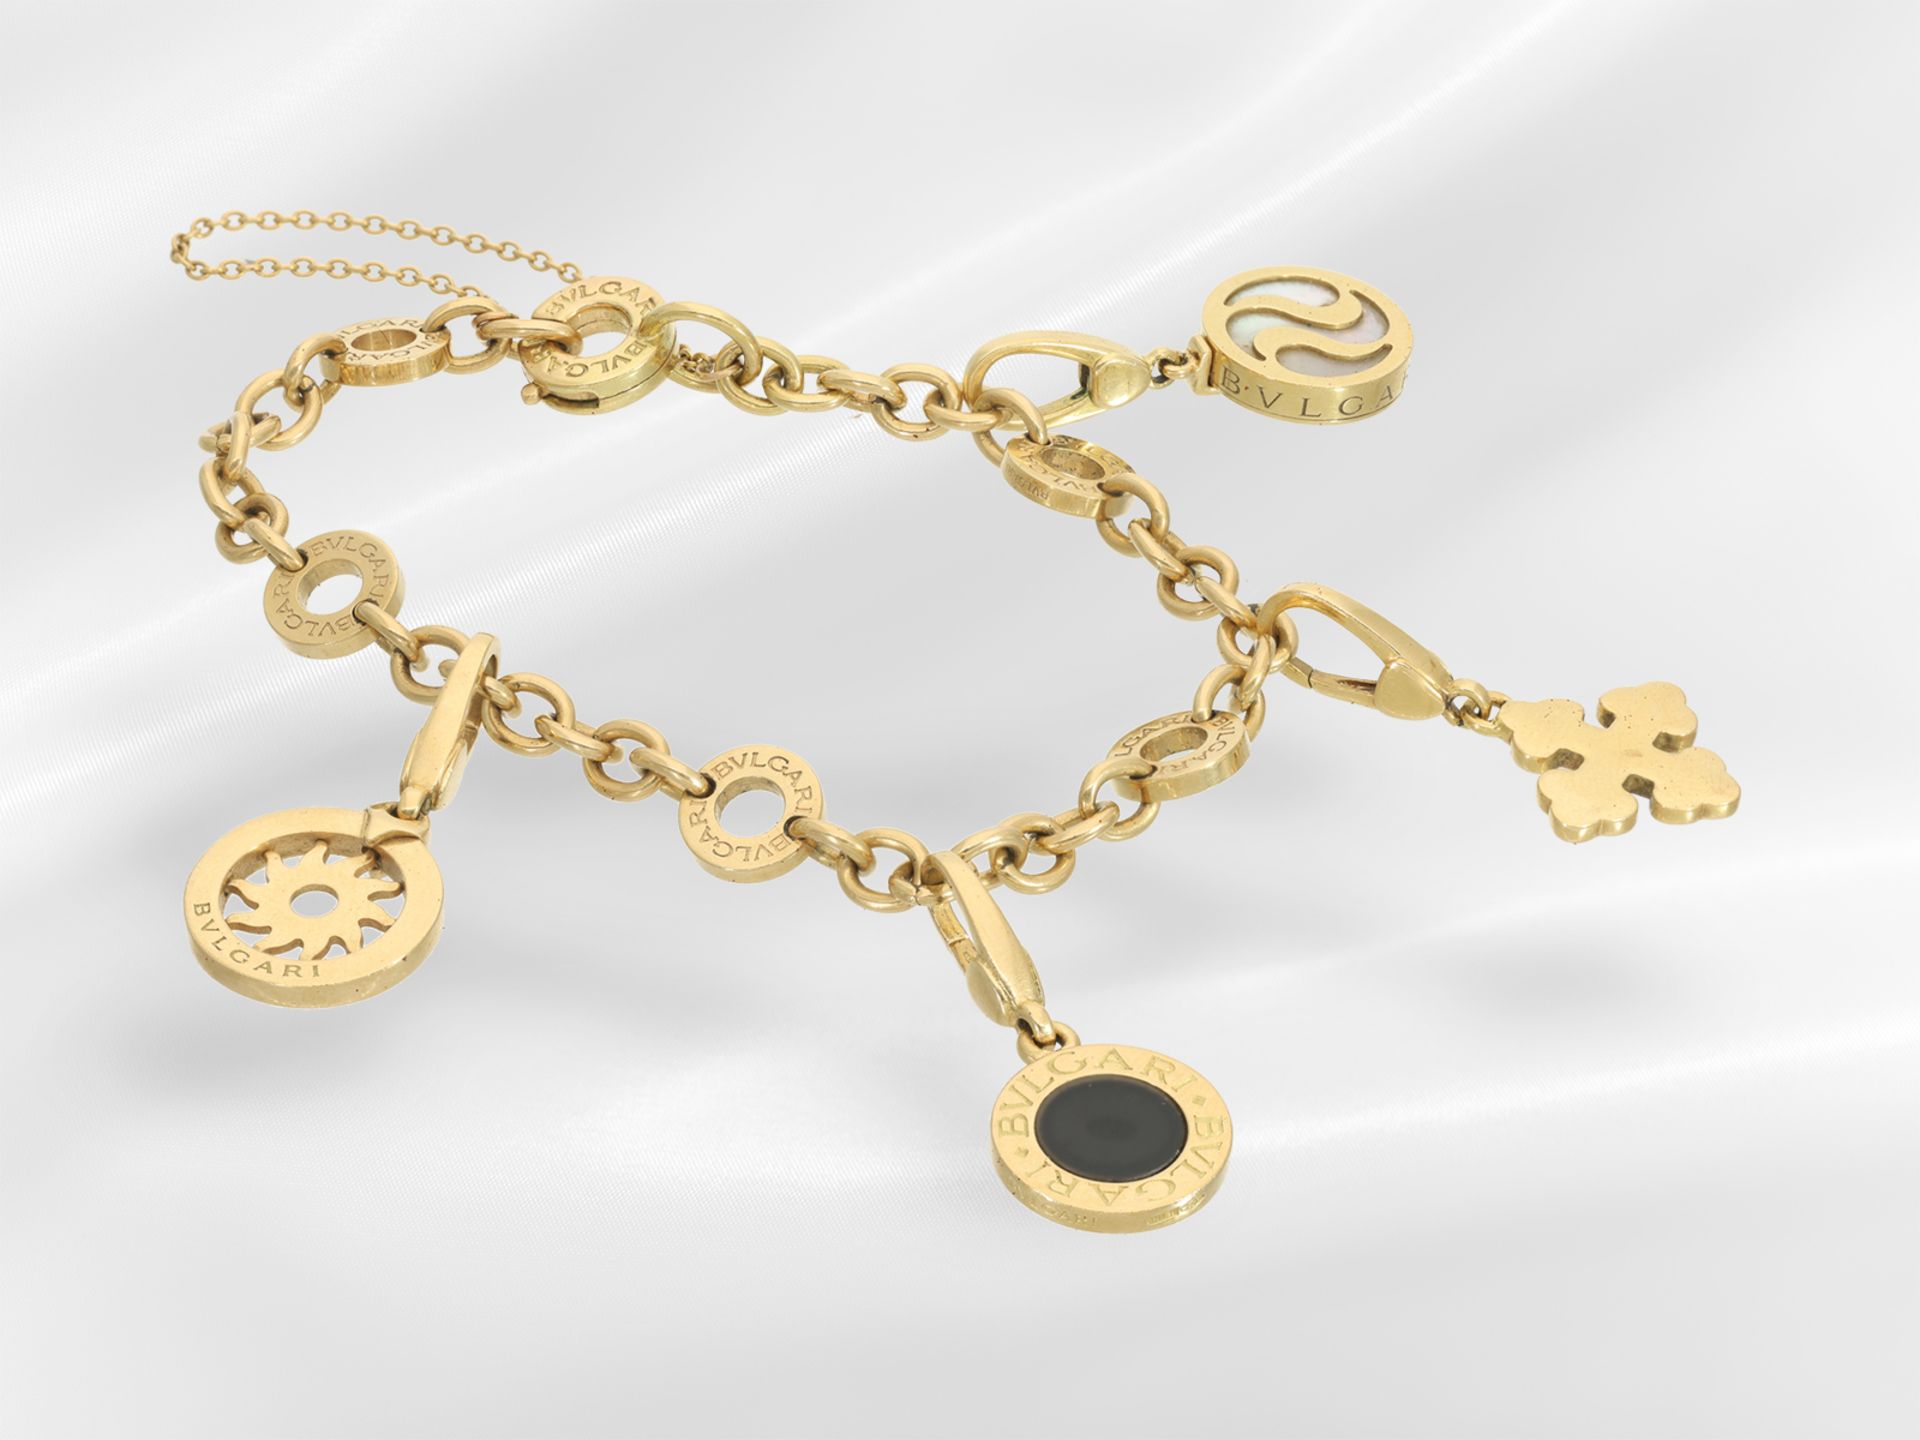 Bracelet: Bvlgari beggar's bracelet with 4 Bvlgari charms, box and papers